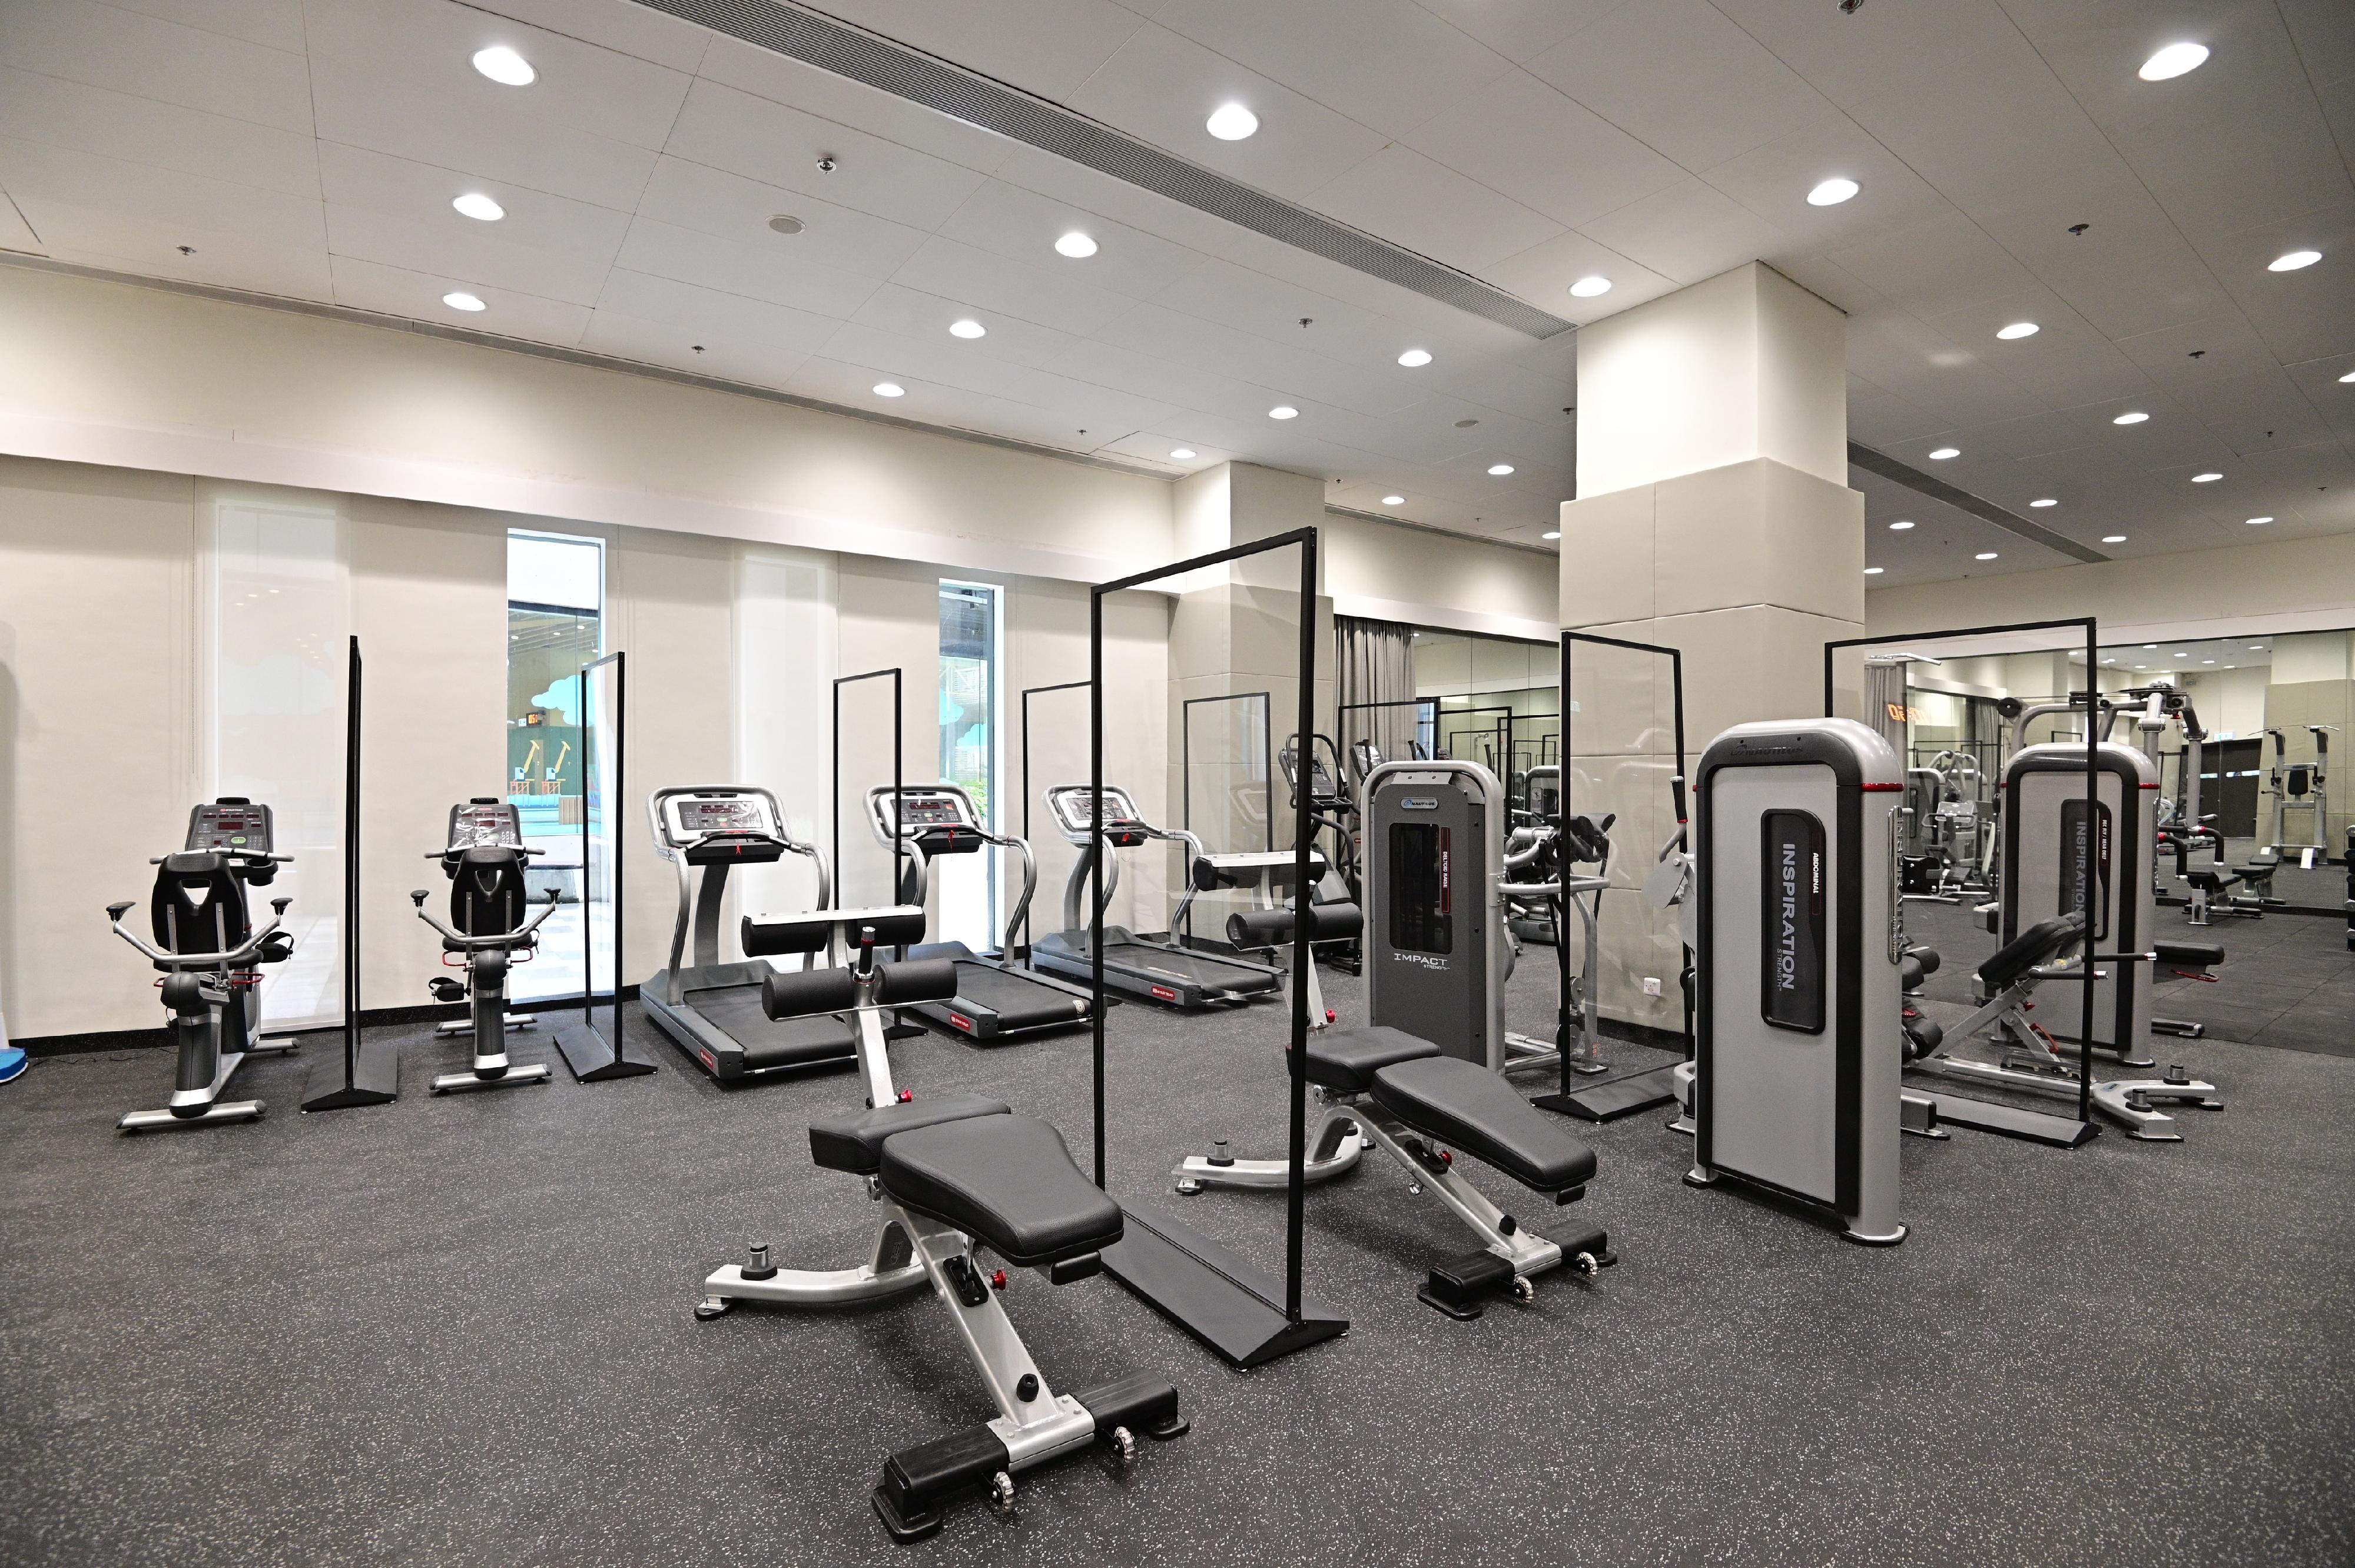 Sham Shui Po Sports Centre, managed by the Leisure and Cultural Services Department, will open for public use on September 28 (Wednesday), providing a wide range of leisure and sports facilities. Photo shows the fitness room.